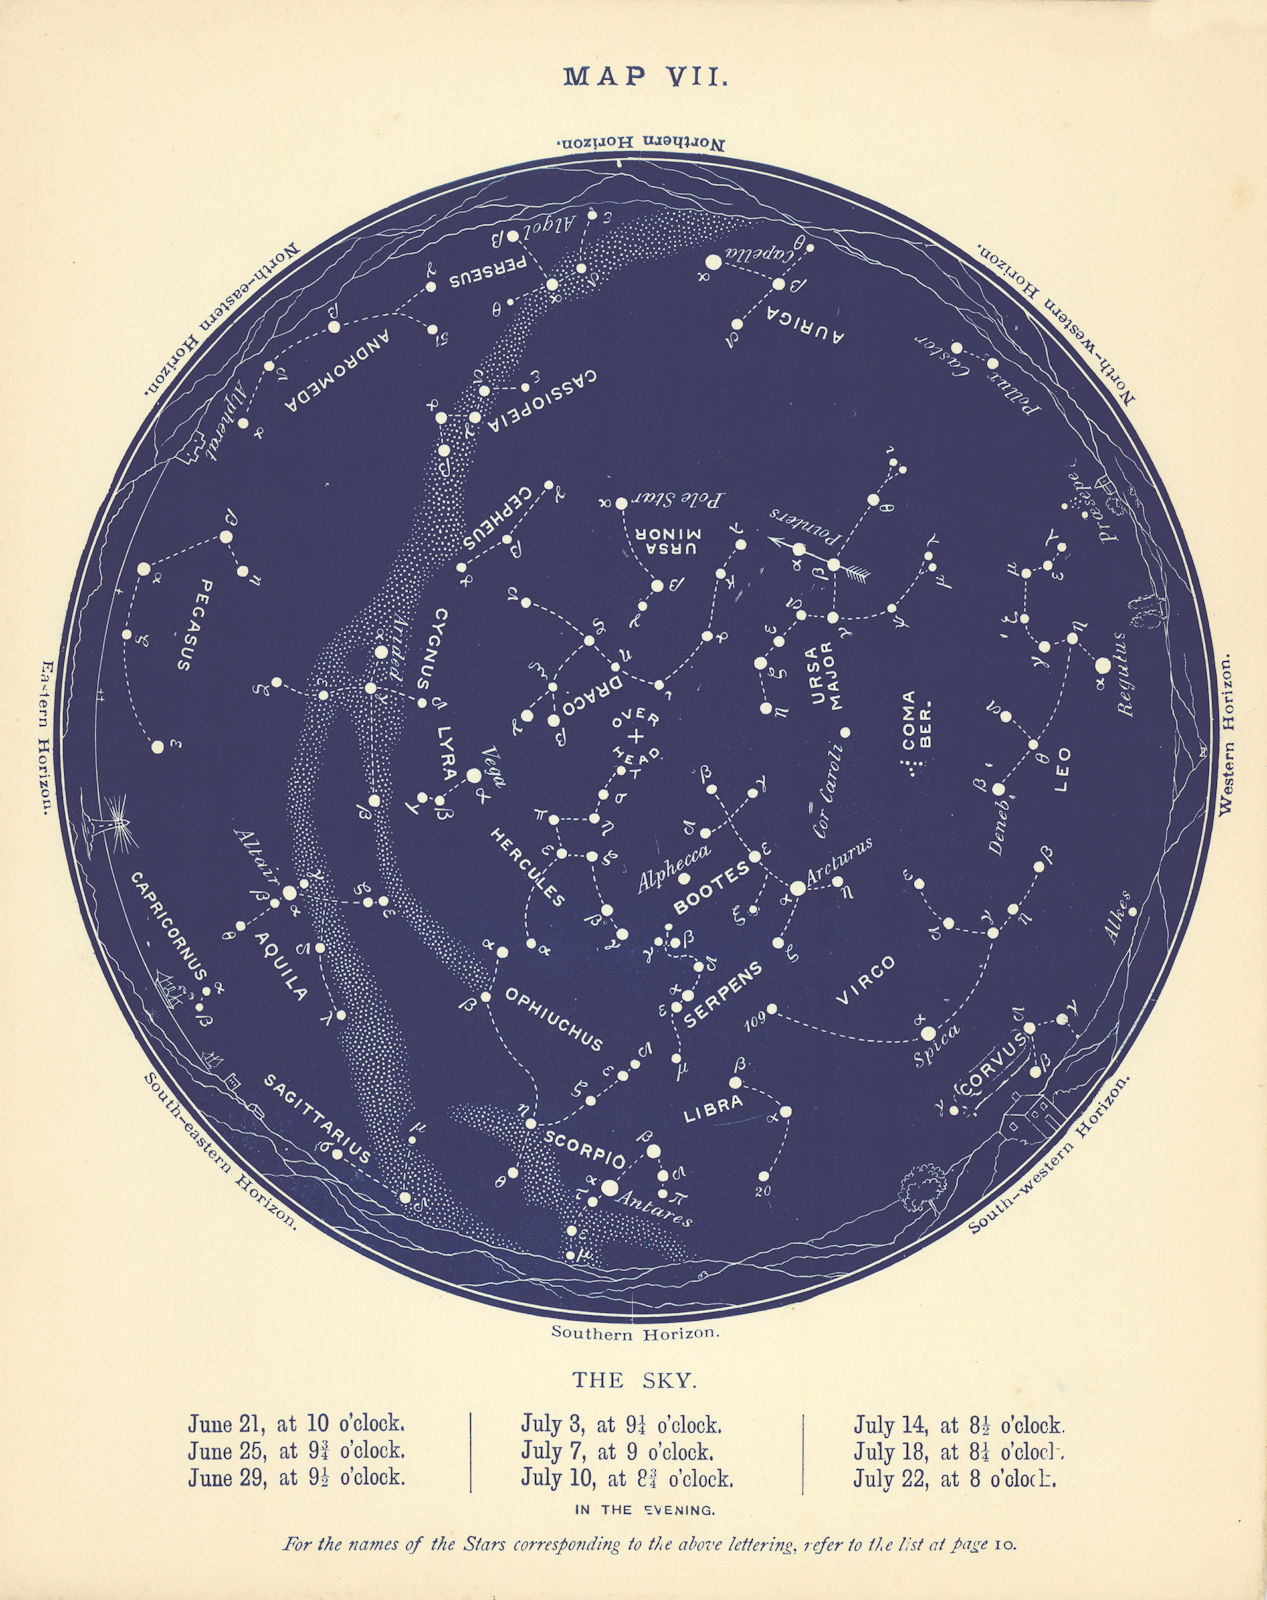 Associate Product STAR MAP VII. The Night Sky. June-July. Astronomy. PROCTOR 1896 old